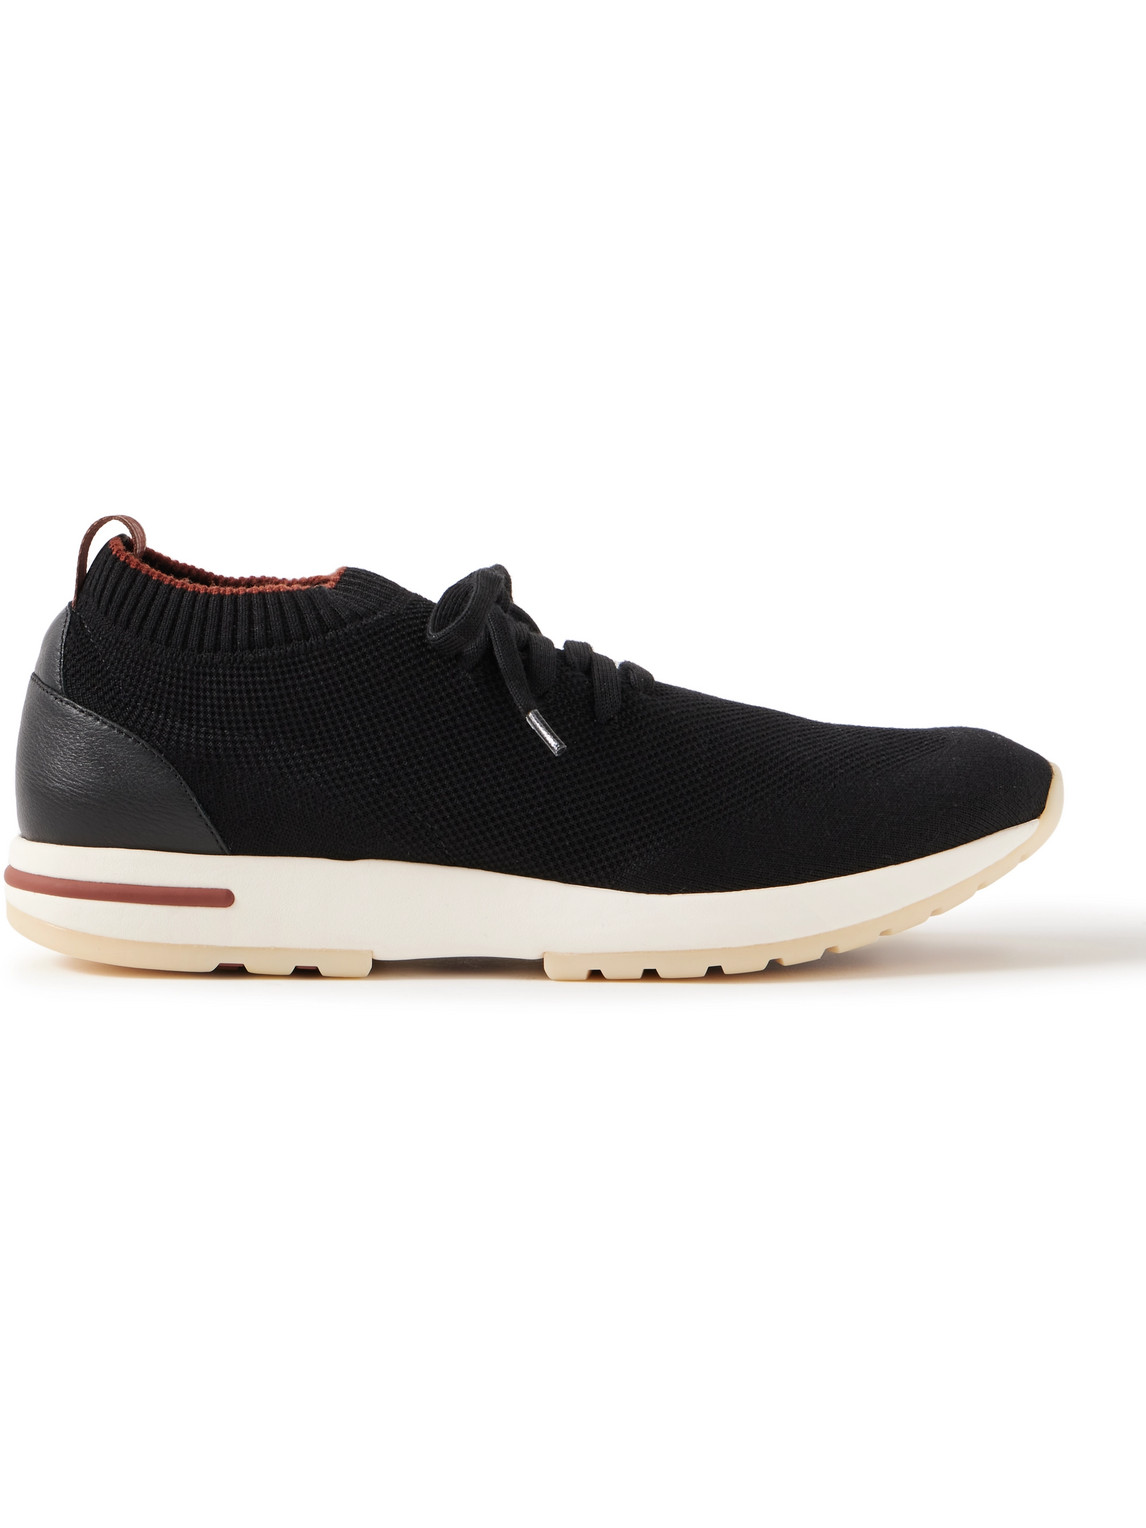 360 Flexy Walk Leather-Trimmed Knitted Wish® Wool Sneakers